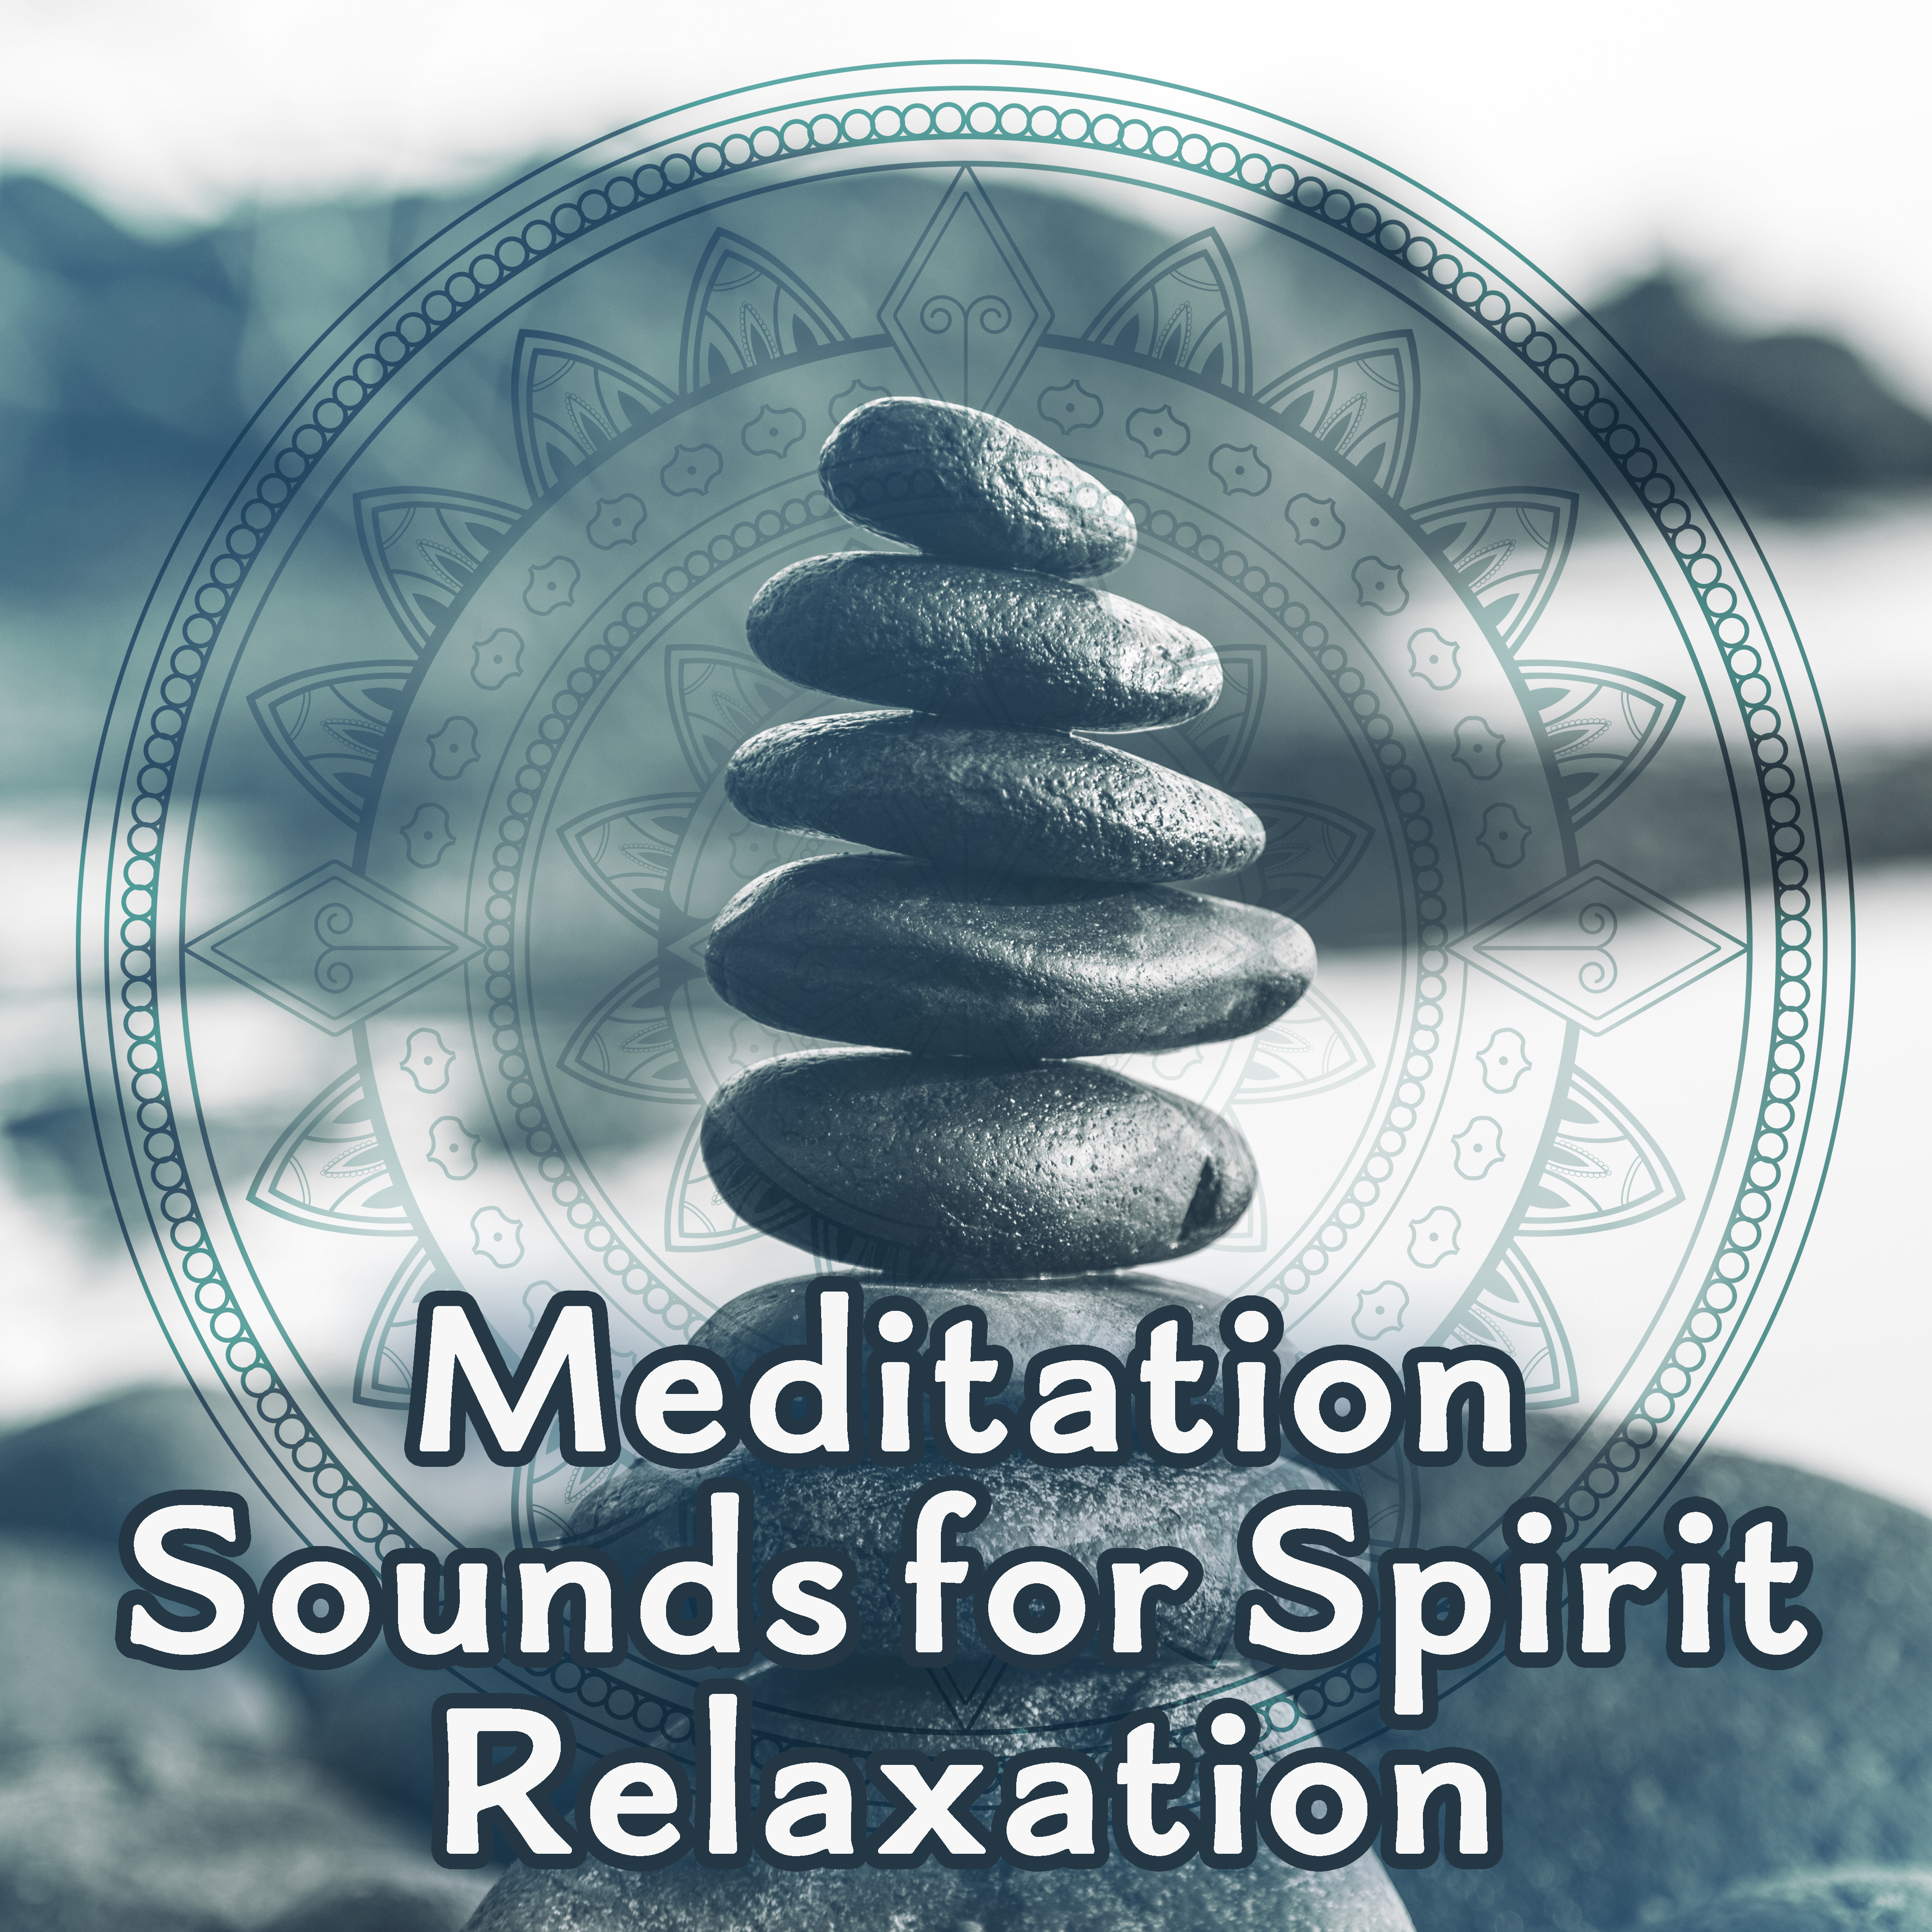 Meditation Sounds for Spirit Relaxation – Calming Meditation Sounds, Stress Relief, Peaceful Waves